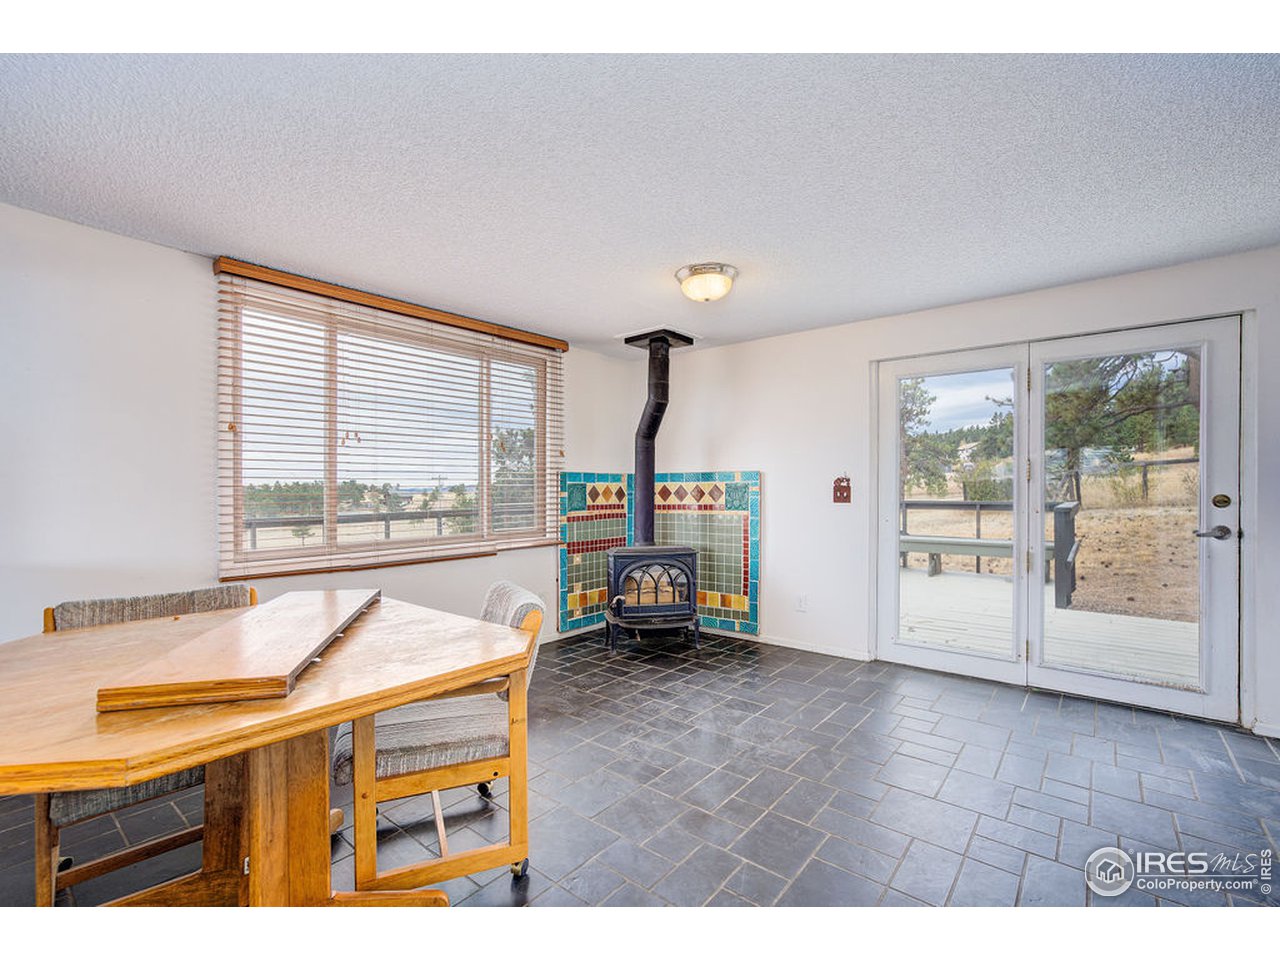 Open Entrance w/Great Tile Floor and Pellet Stove